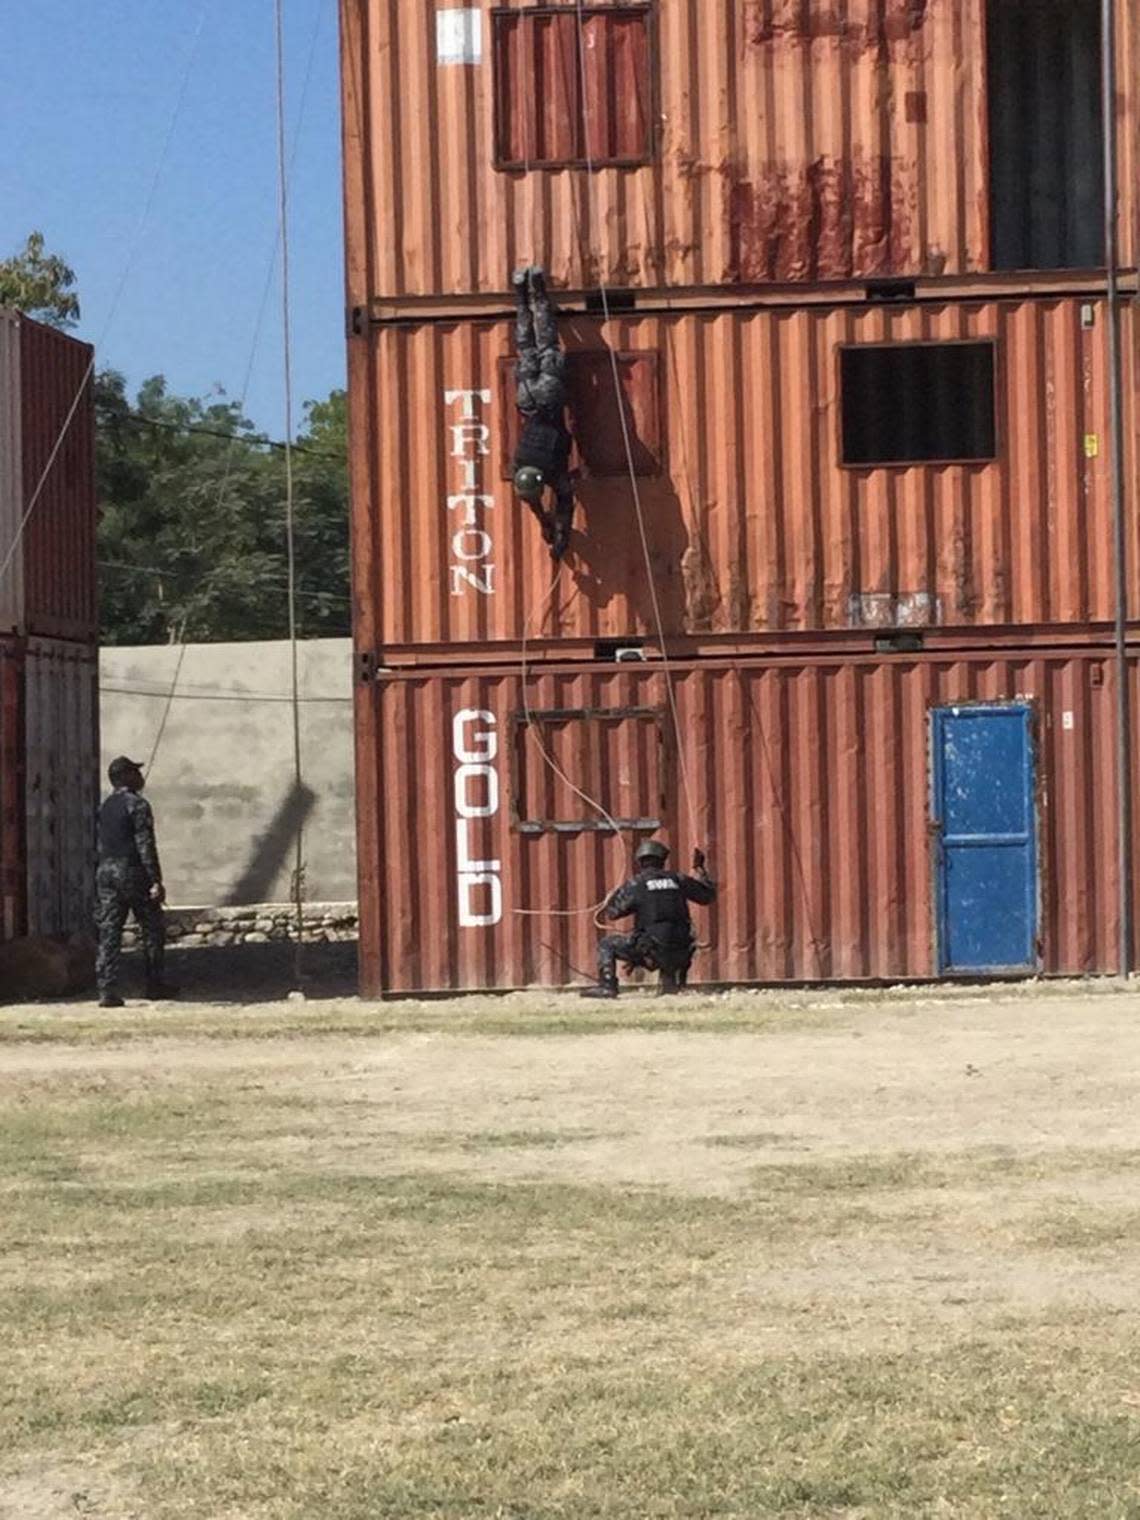 The United States is helping the Haiti National Police train new SWAT officers in the country. The group recently showed off its skills for the head of the Bureau of International Narcotics and Law Enforcement Affairs, Todd Robinson, during a January 2023 visit to Port-au-Prince, Haiti.